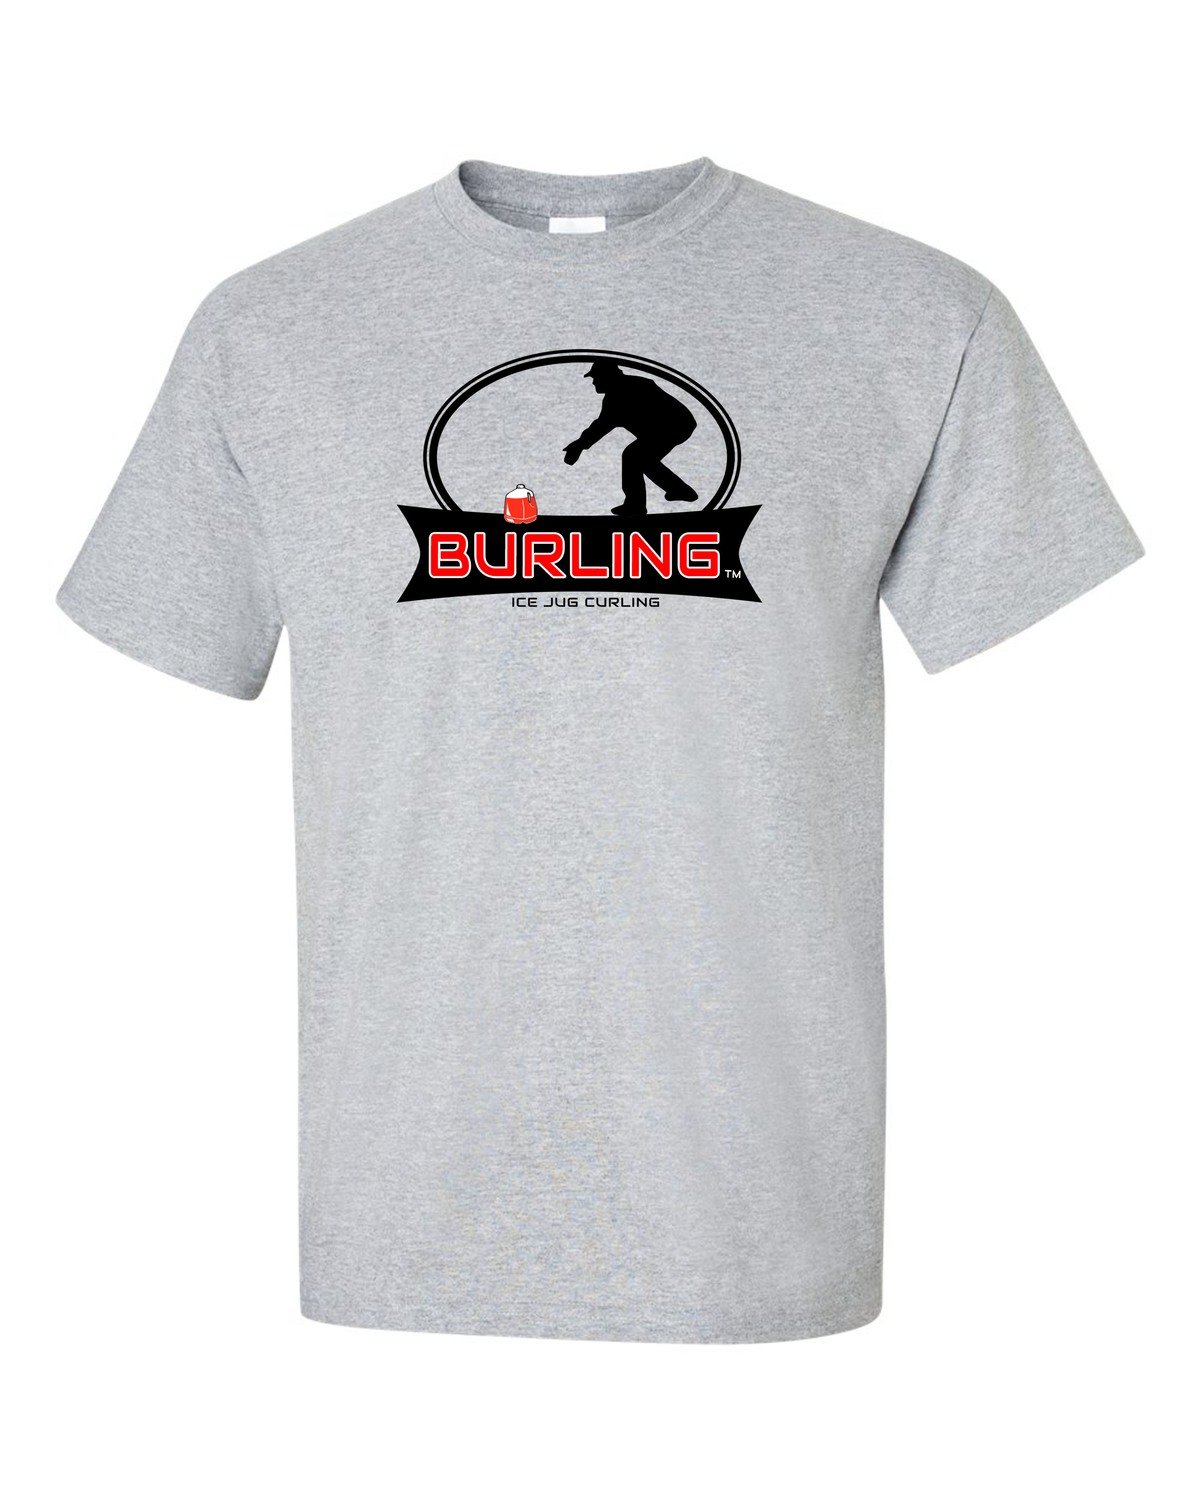 Burling Mens Grey T-shirt with Full Color